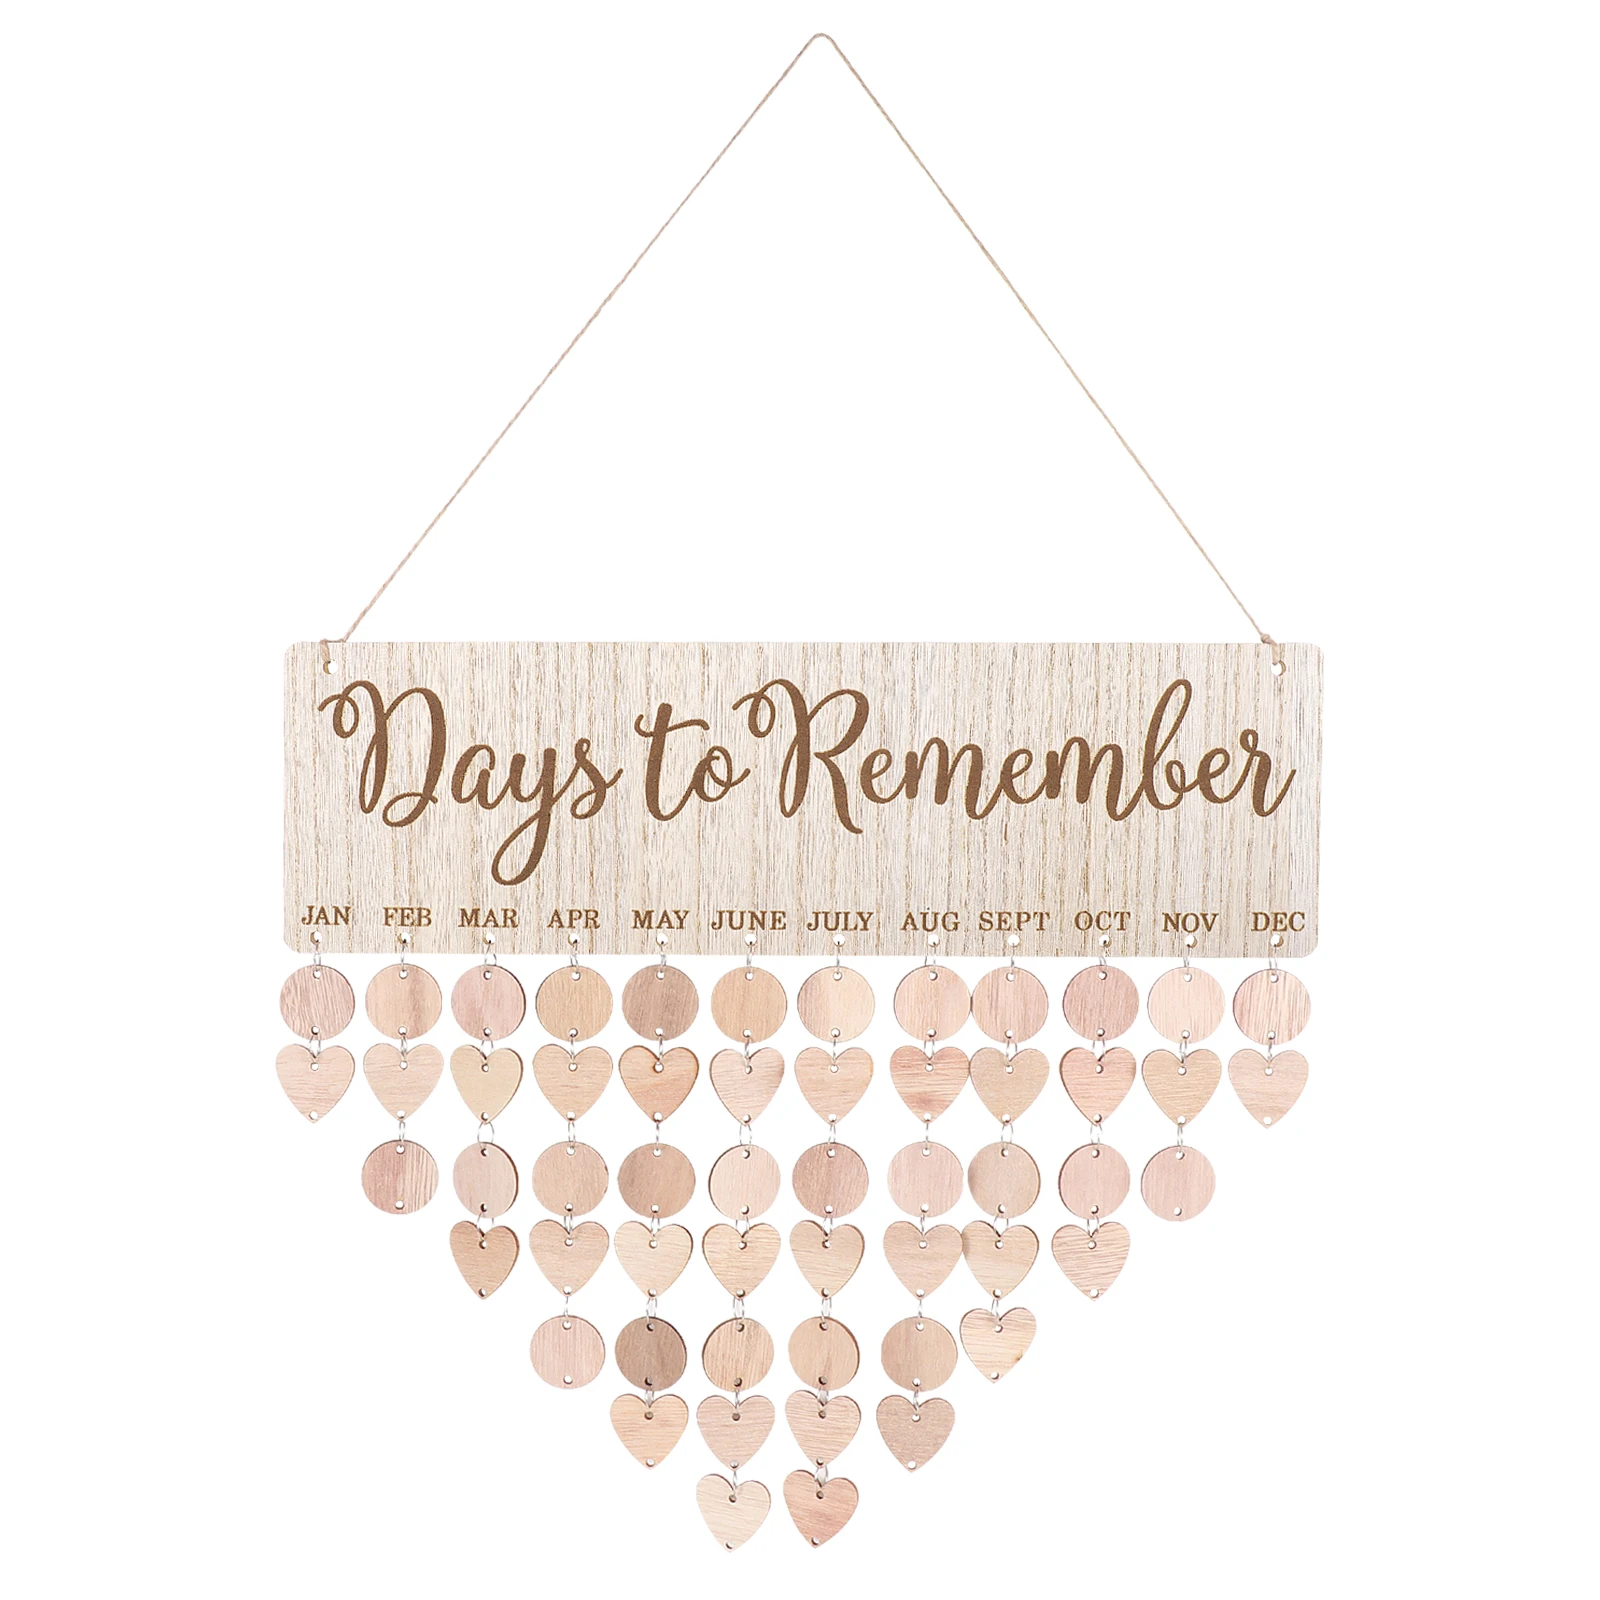 

Days to Remember Board Wall Hanging Wooden Family Birthday Reminder Calendar Sign Board Wooden Family Blessings Calendar Plaque